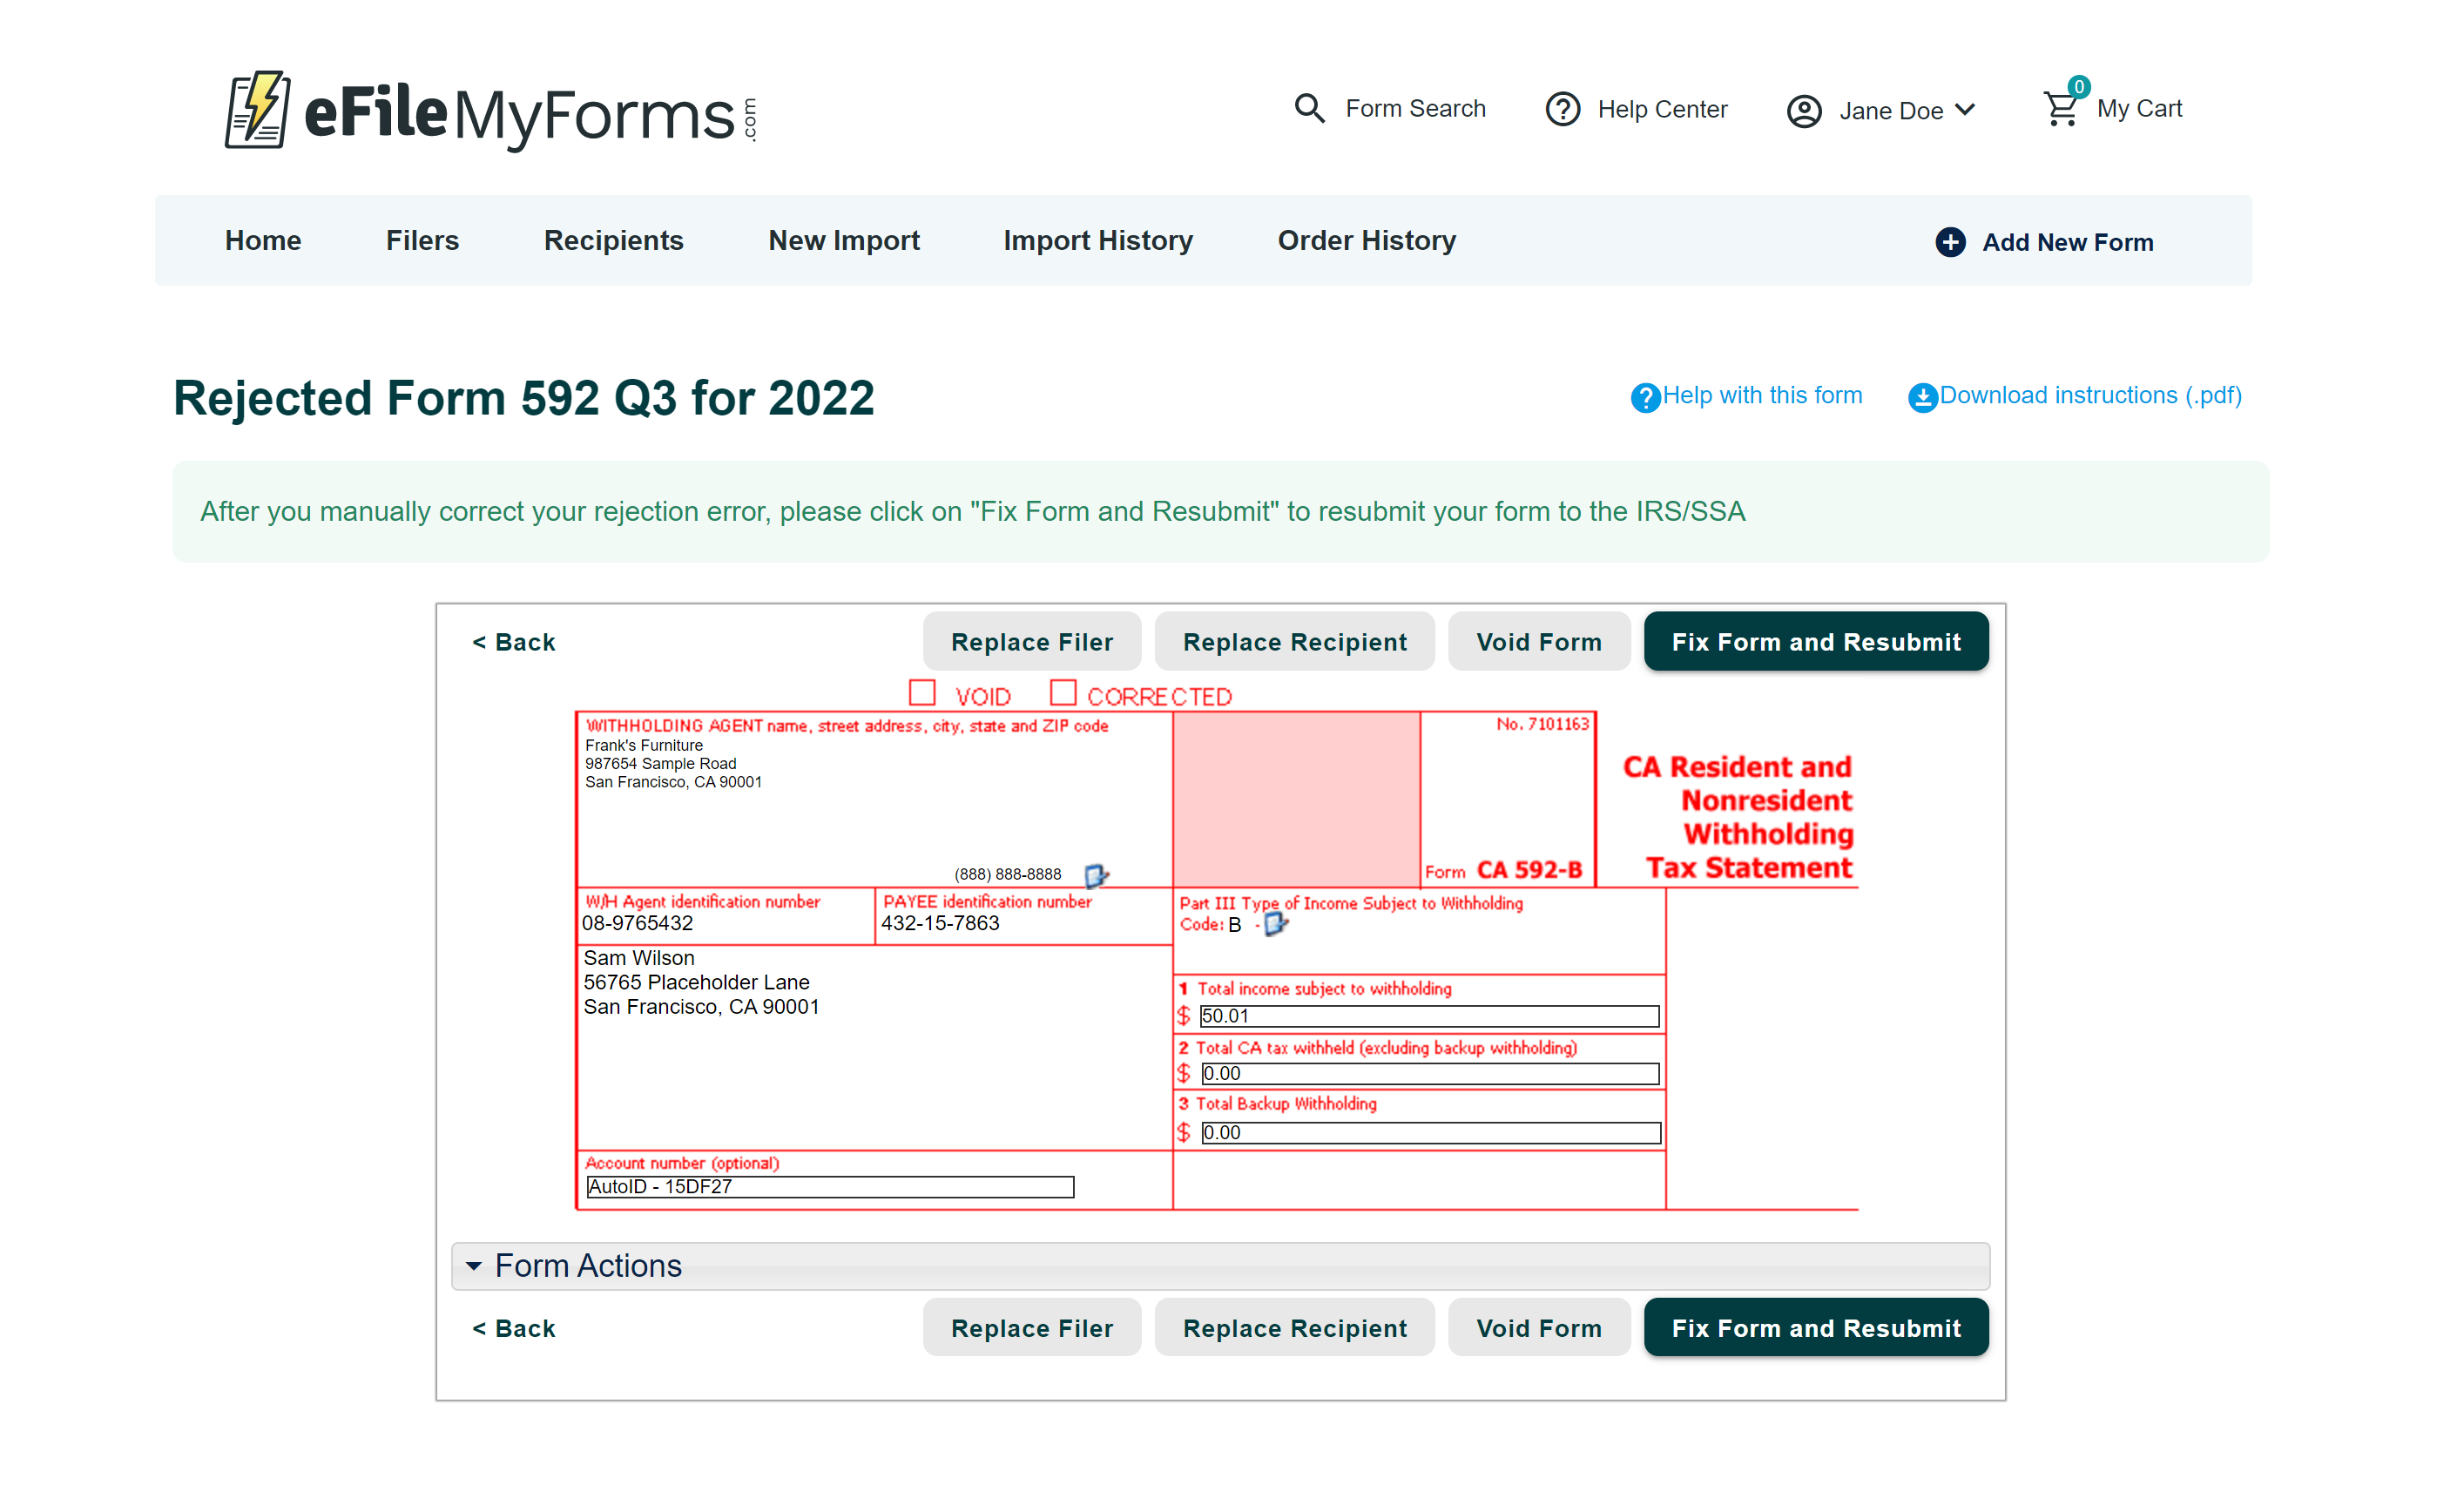 Image the Rejected Form page showing a previously filed form that has been rejected by the IRS/SSA.